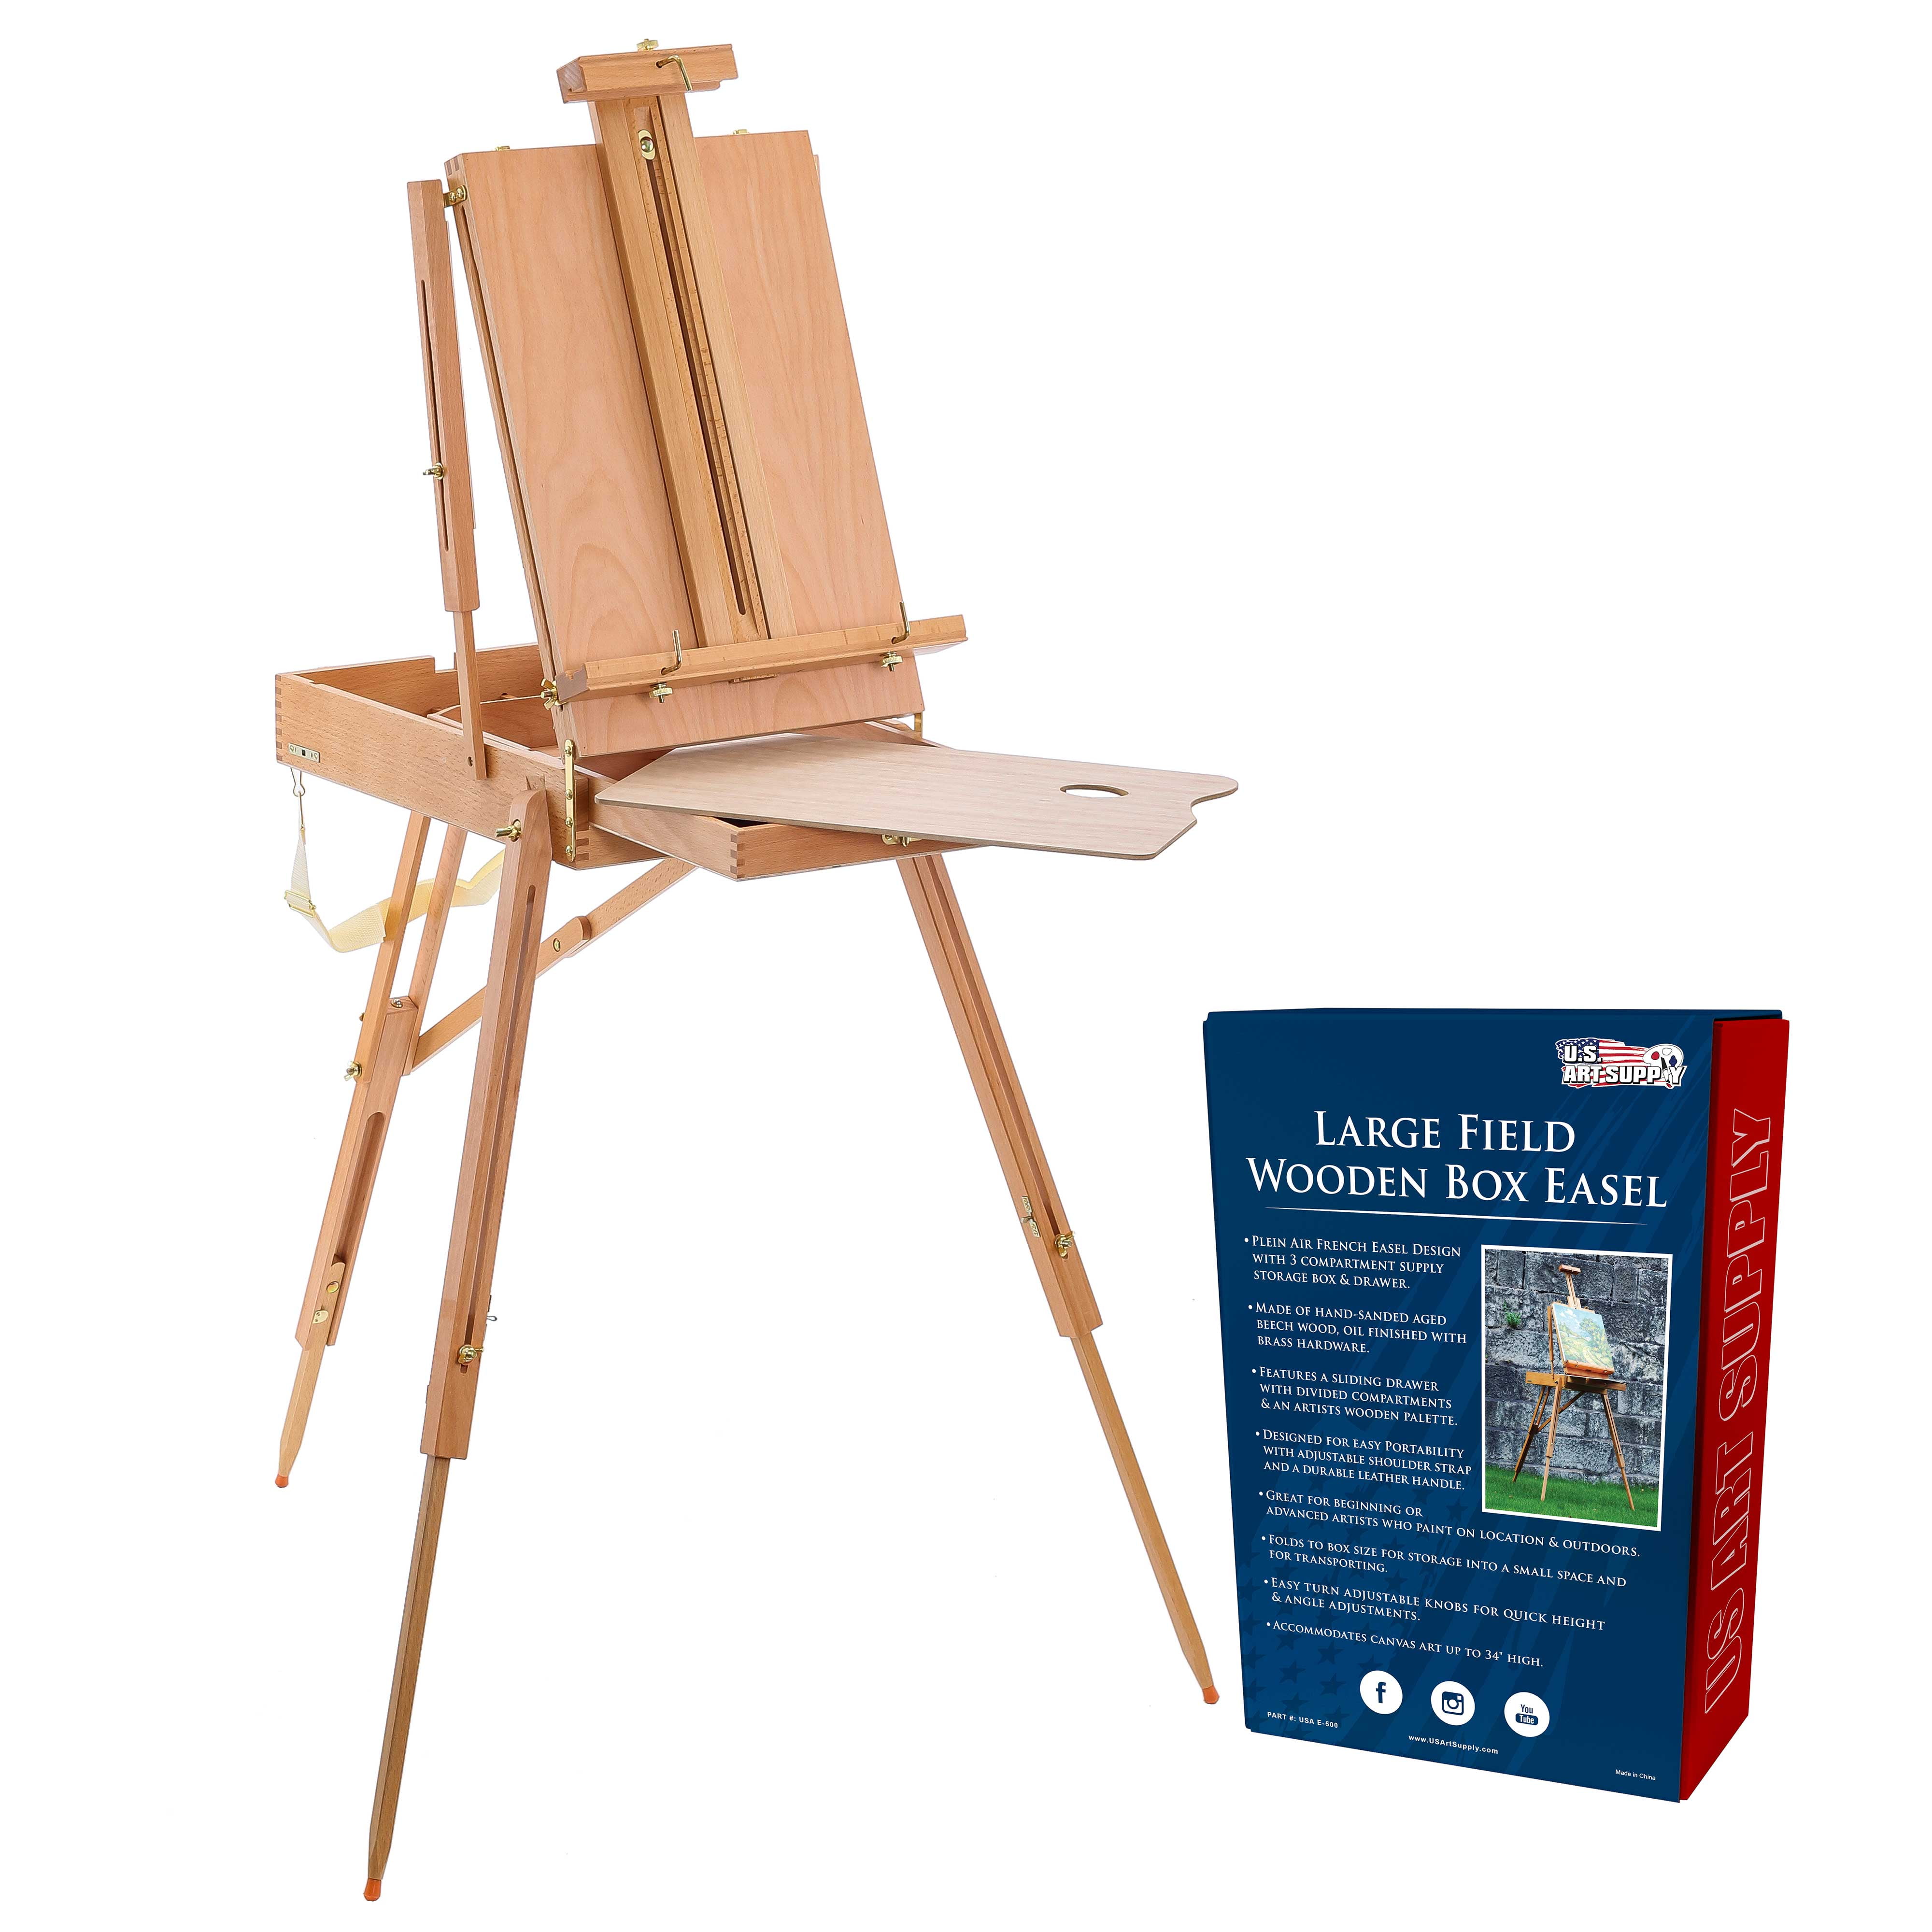  Artist Quality French Easel - Portable Art Easel with